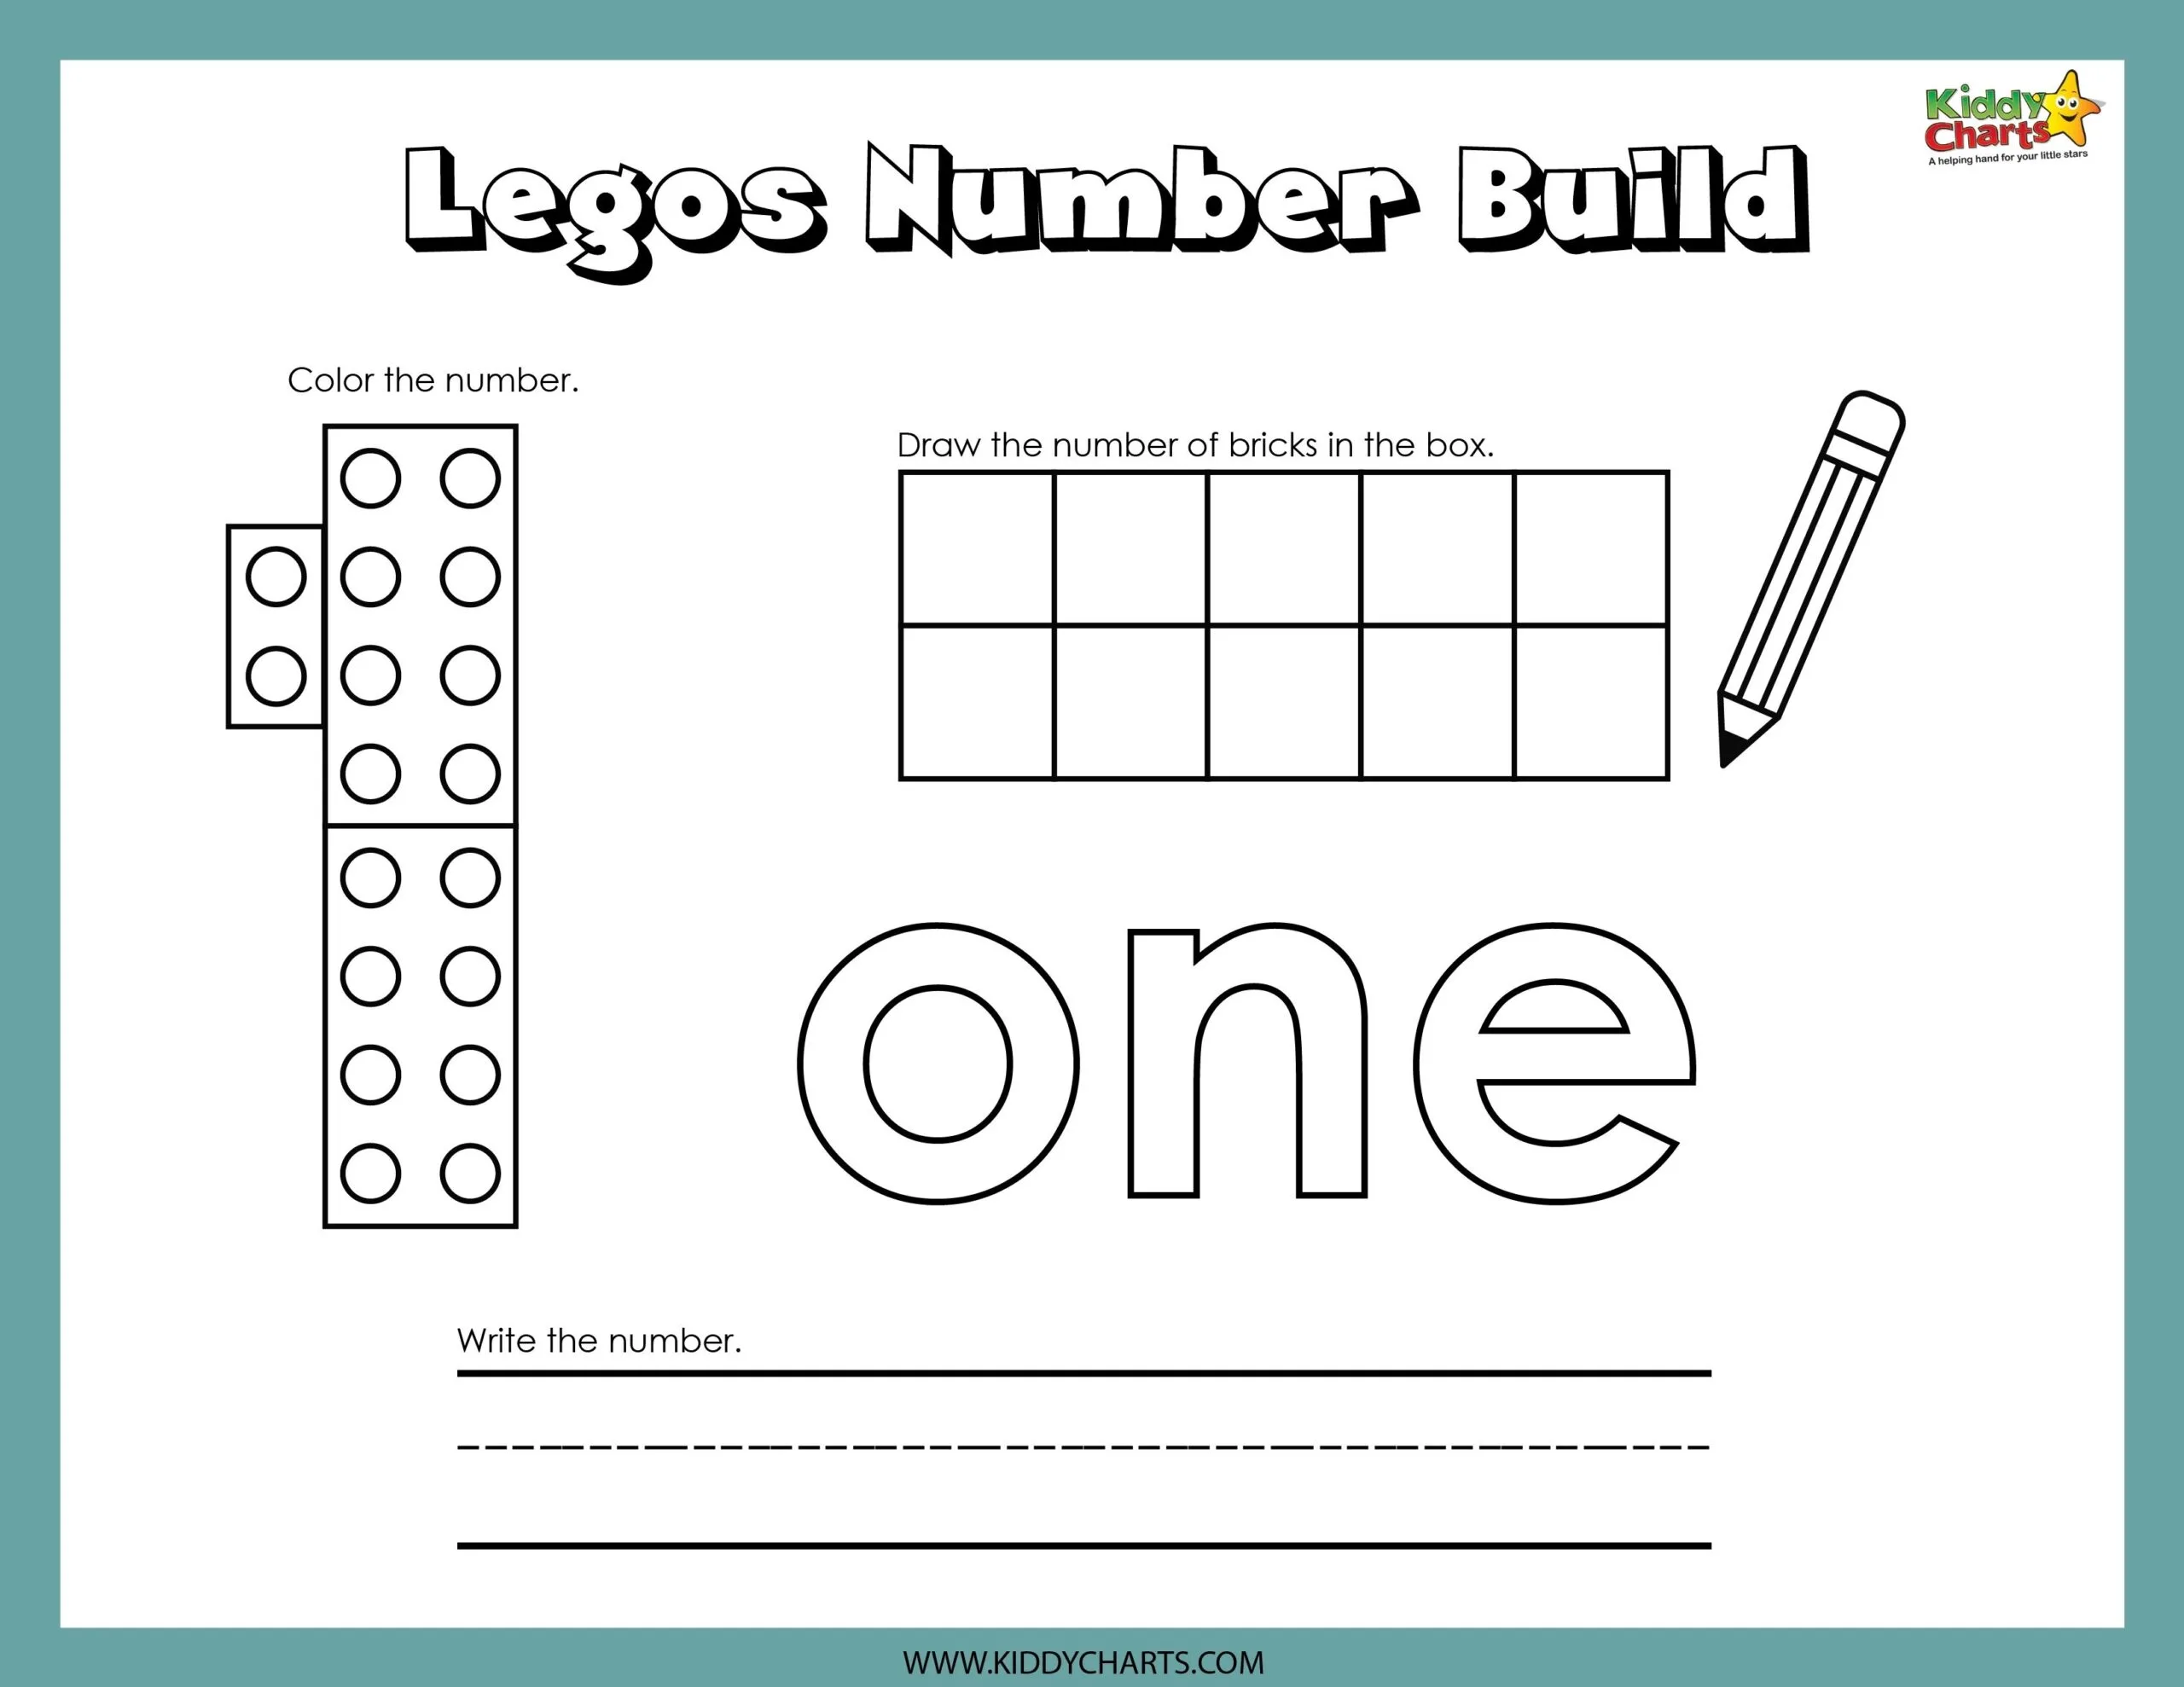 Lego numbers building activity